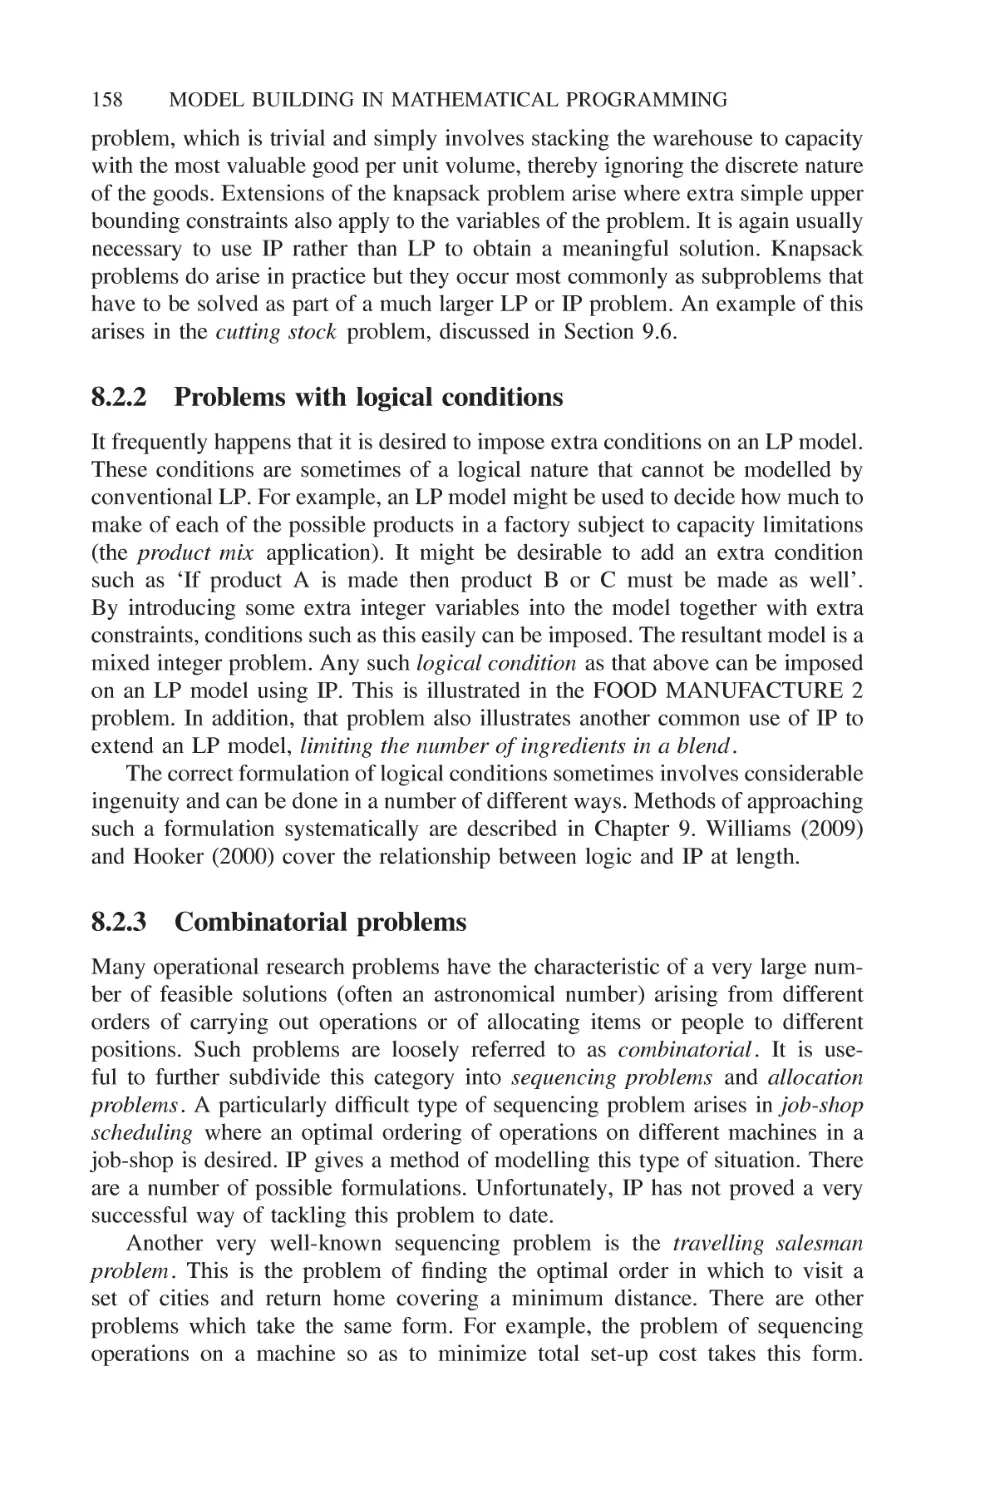 8.2.2 Problems with logical conditions
8.2.3 Combinatorial problems